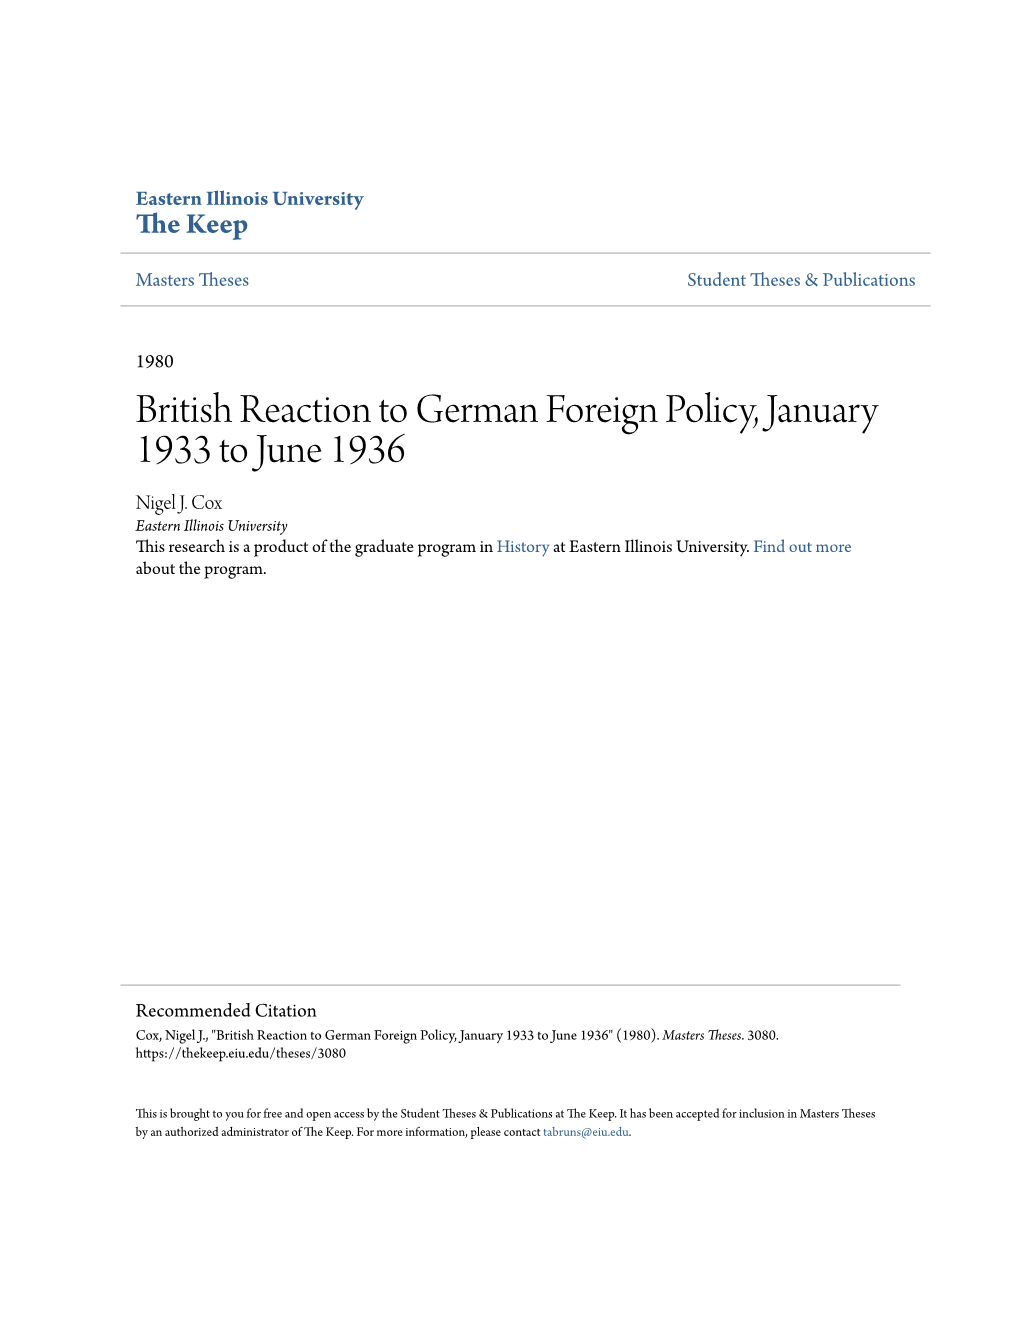 British Reaction to German Foreign Policy, January 1933 to June 1936 Nigel J